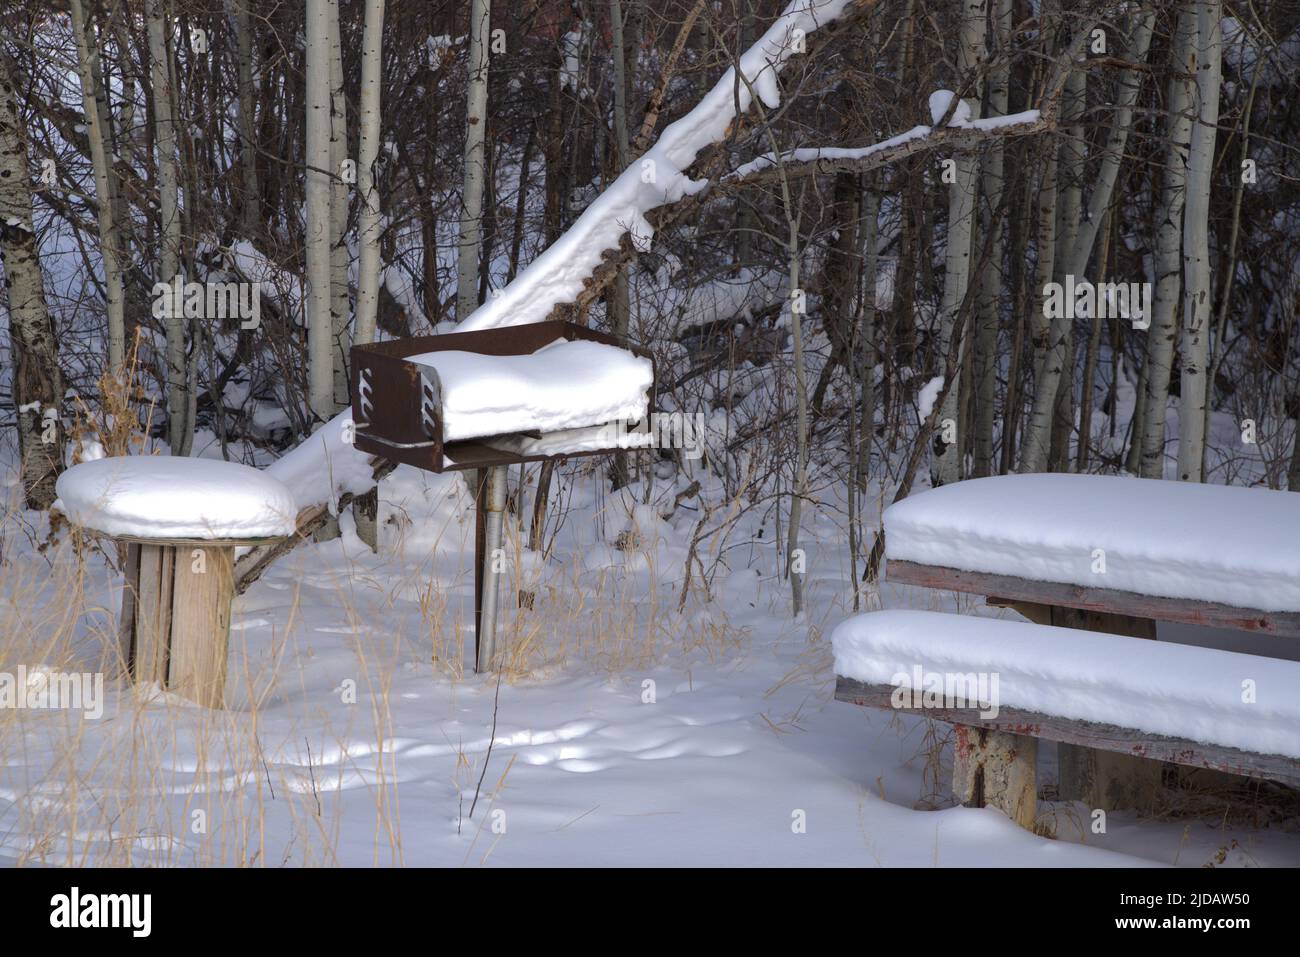 Picnic area with snow on table, grill and bench. Stock Photo